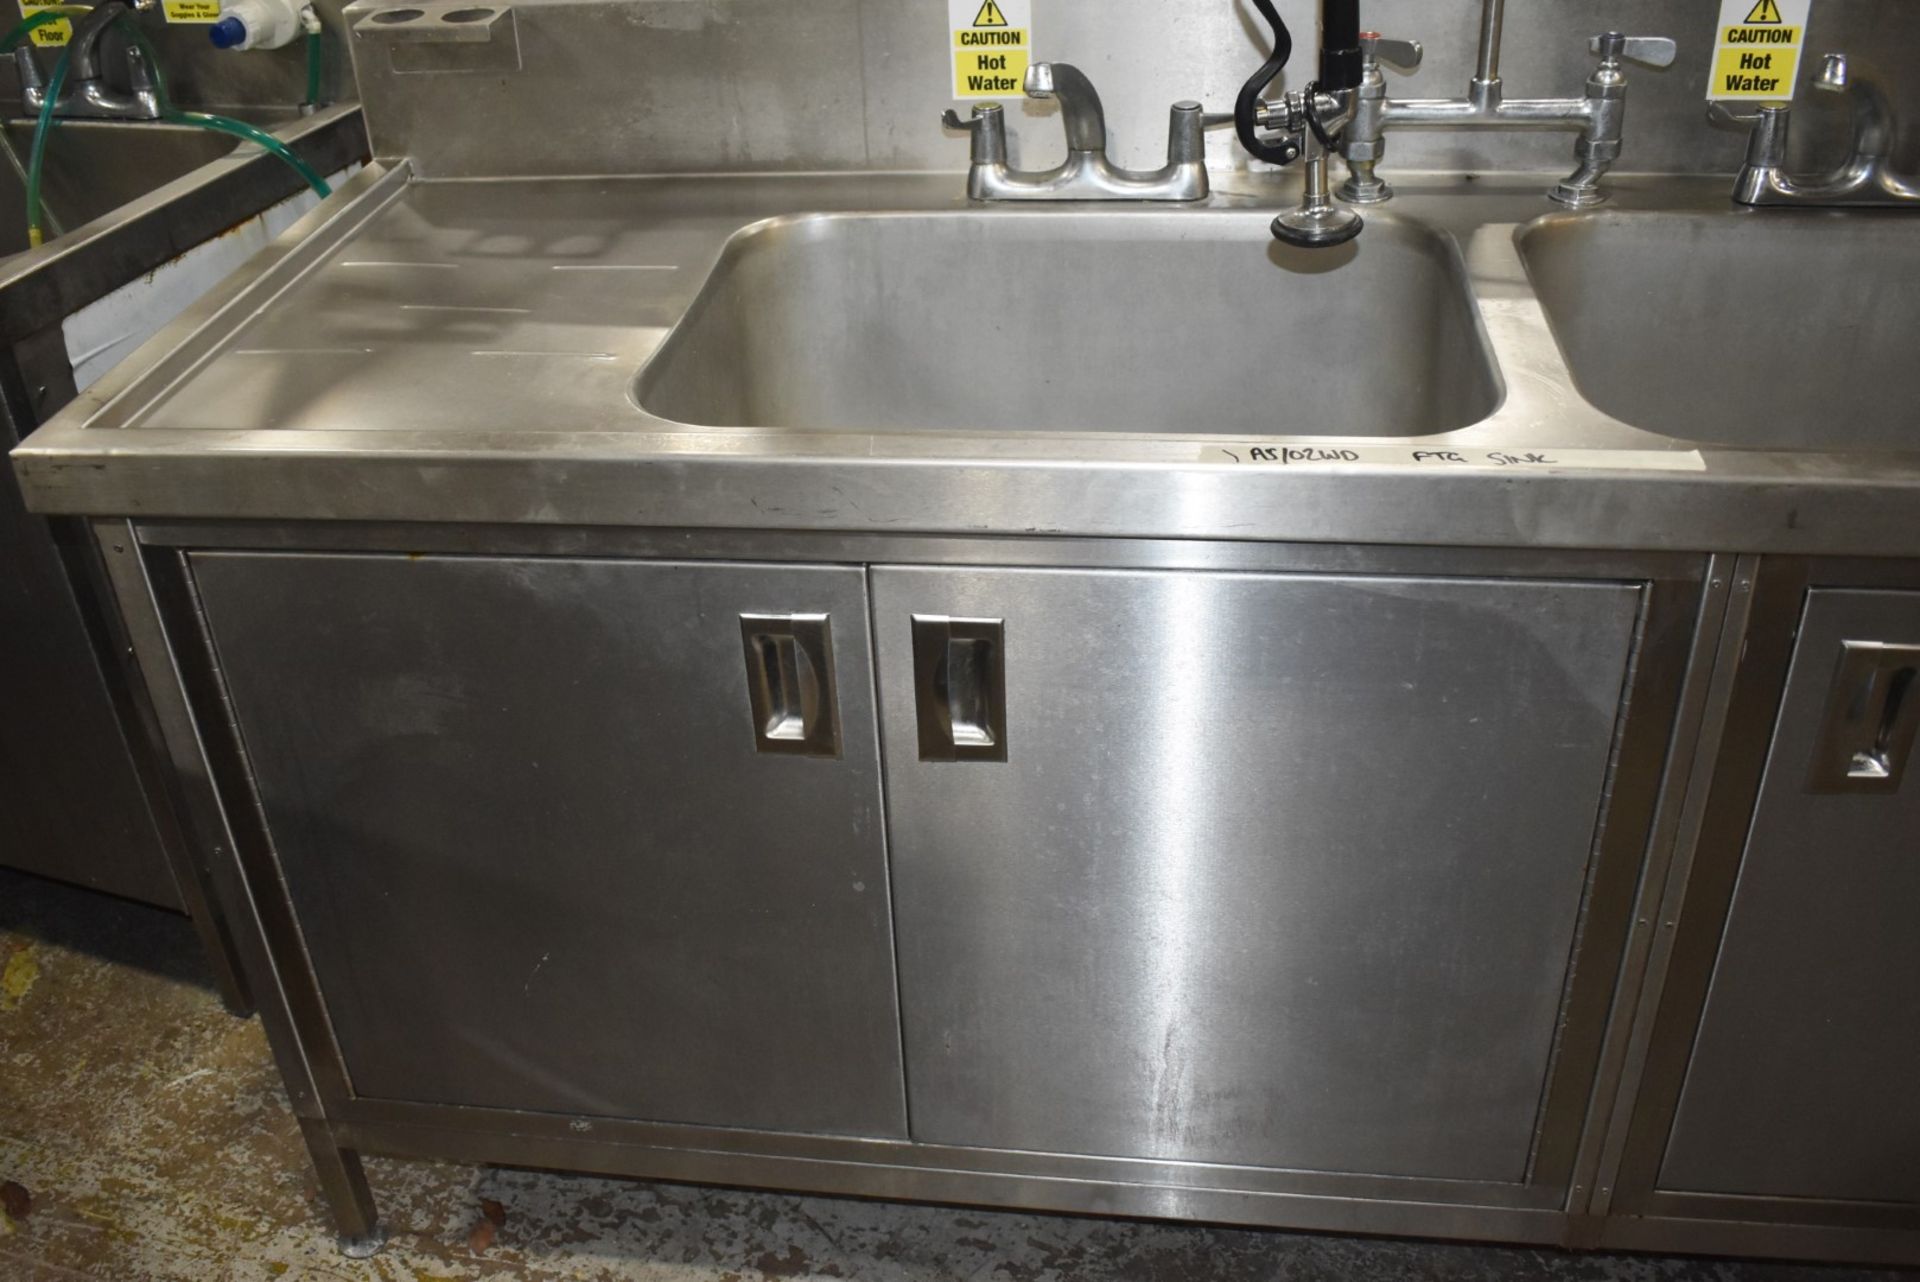 1 x Commercial Kitchen Wash Station With Two Large Sink Bowls, Mixer Taps, Spray Wash Gun, - Image 2 of 15